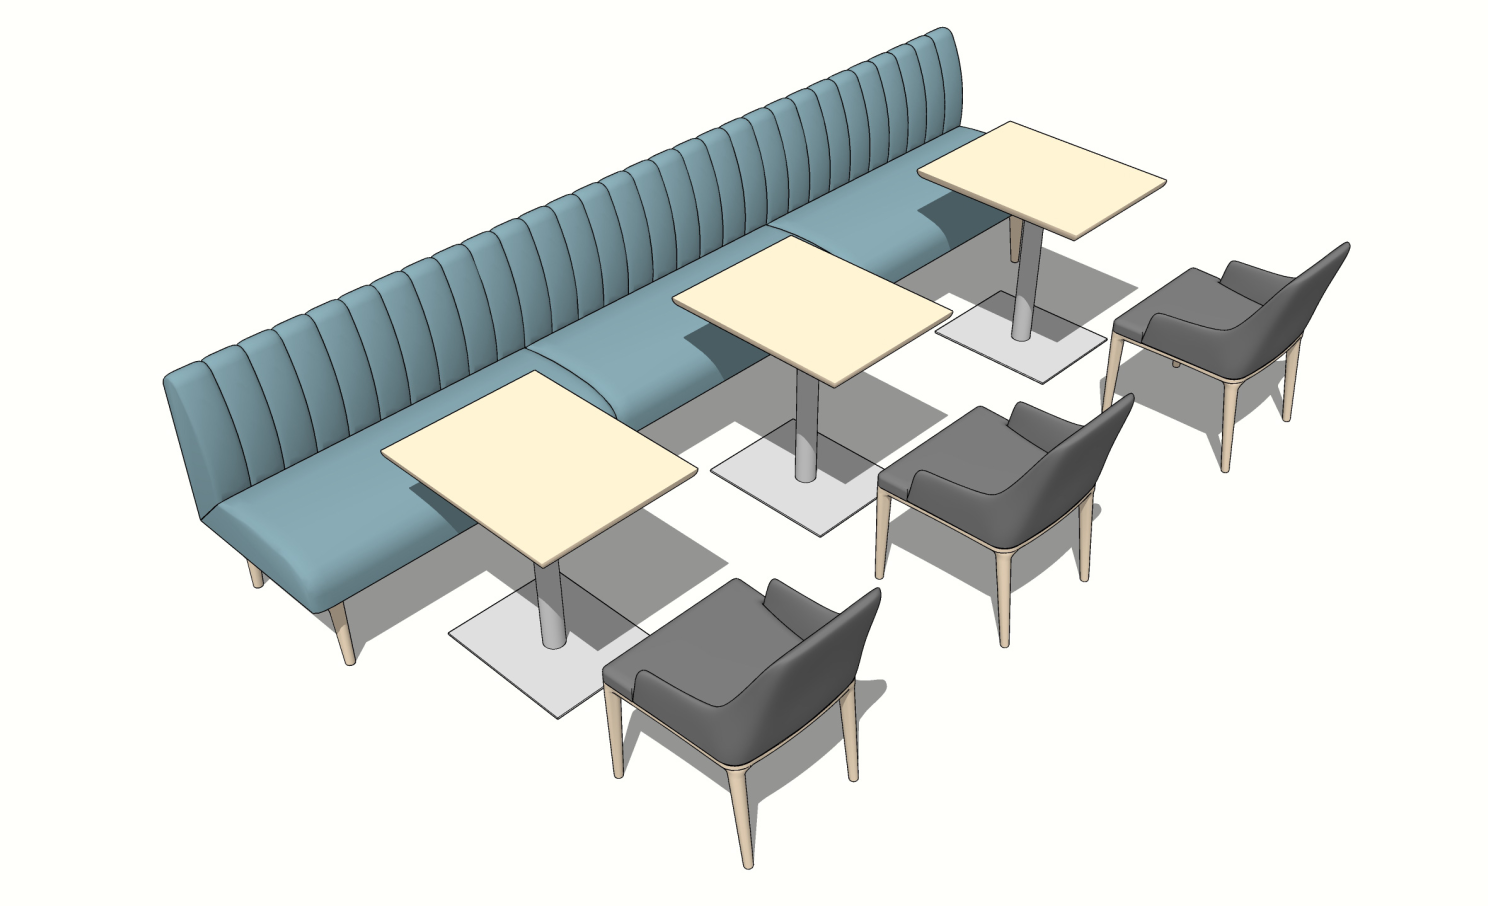 Plain Back Restaurant Booth with Metal Legs